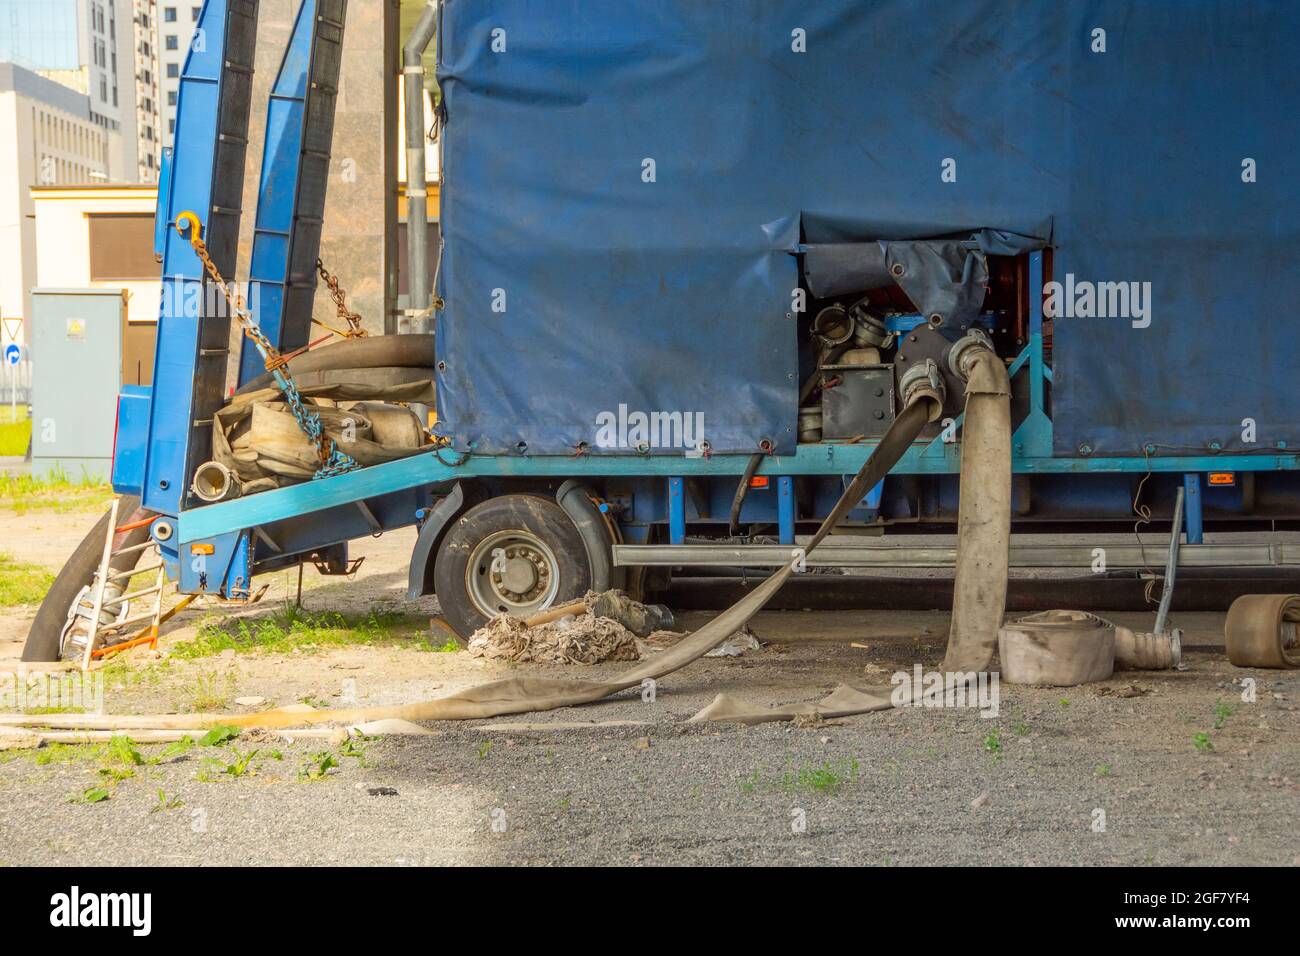 Mobile compressor pumping unit for cleaning rain collectors in urban piping systems Stock Photo